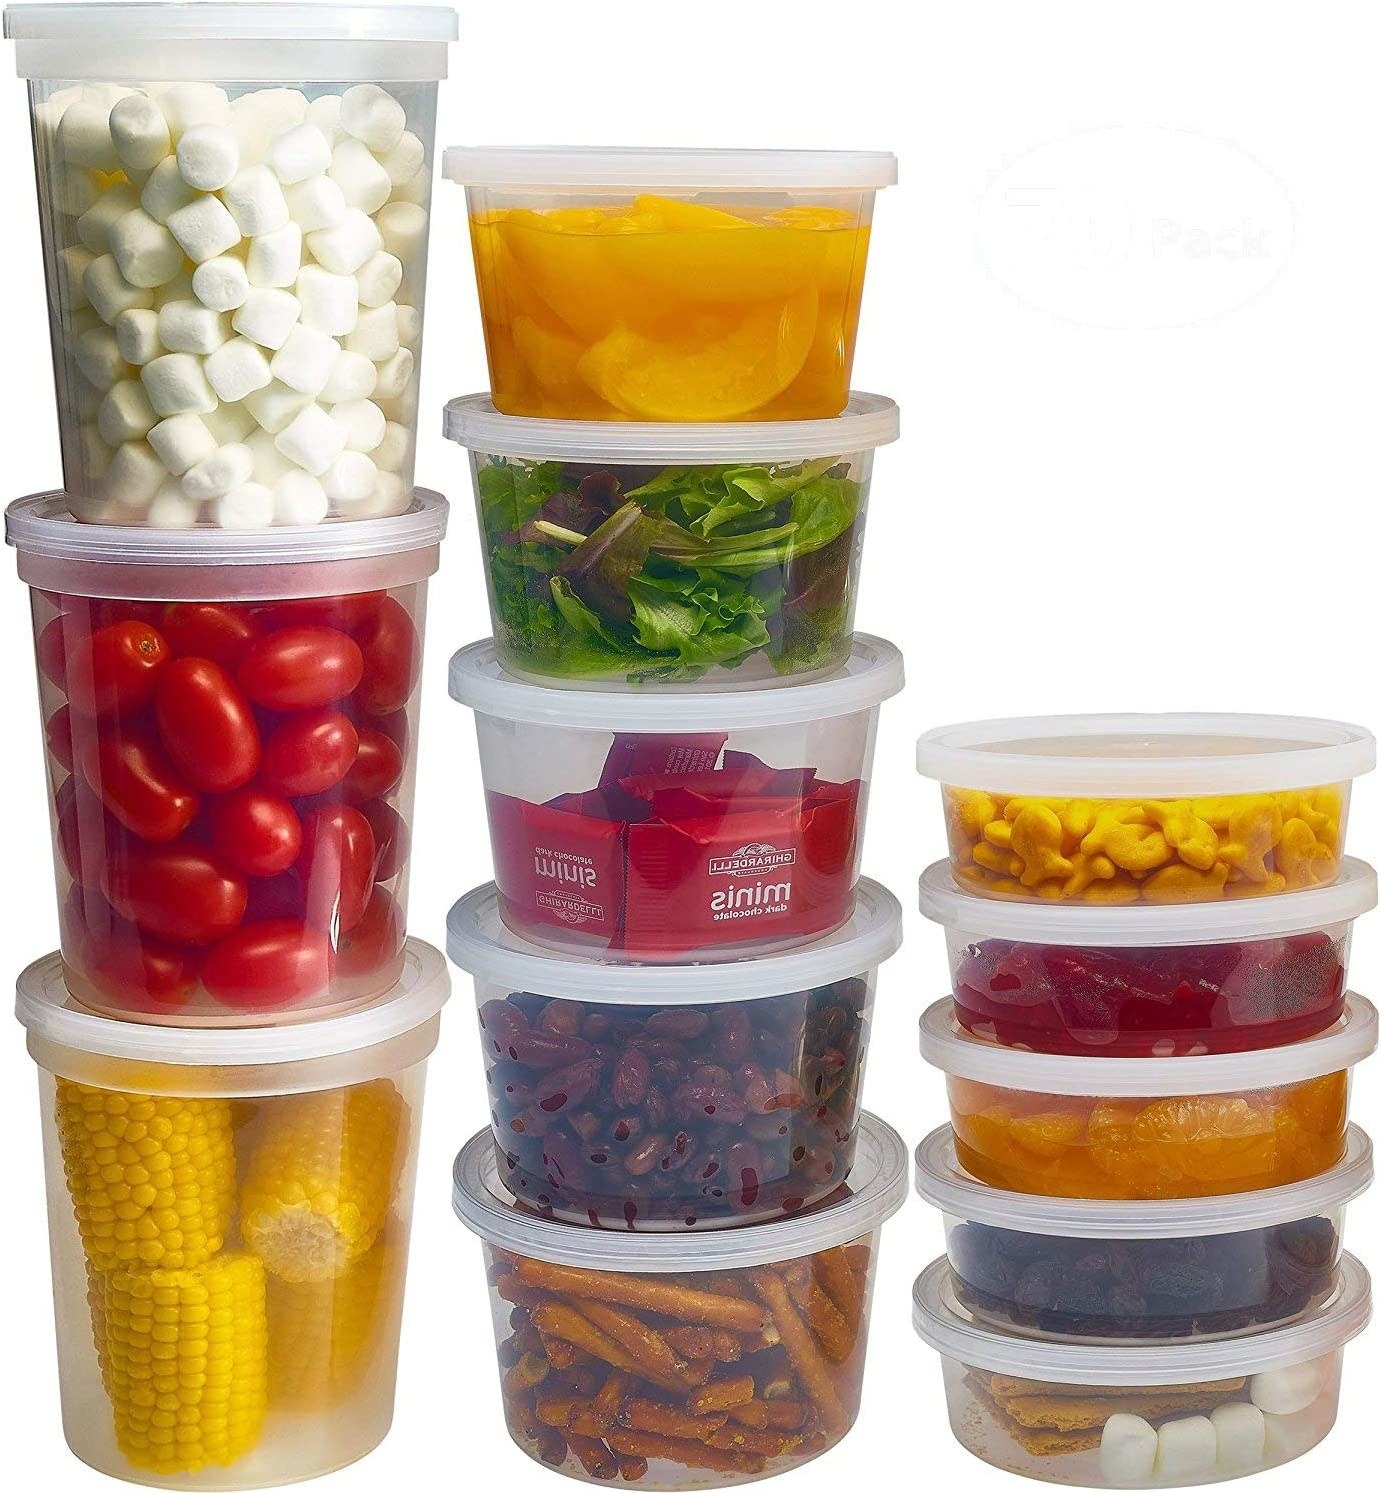 Clear cylindrical containers